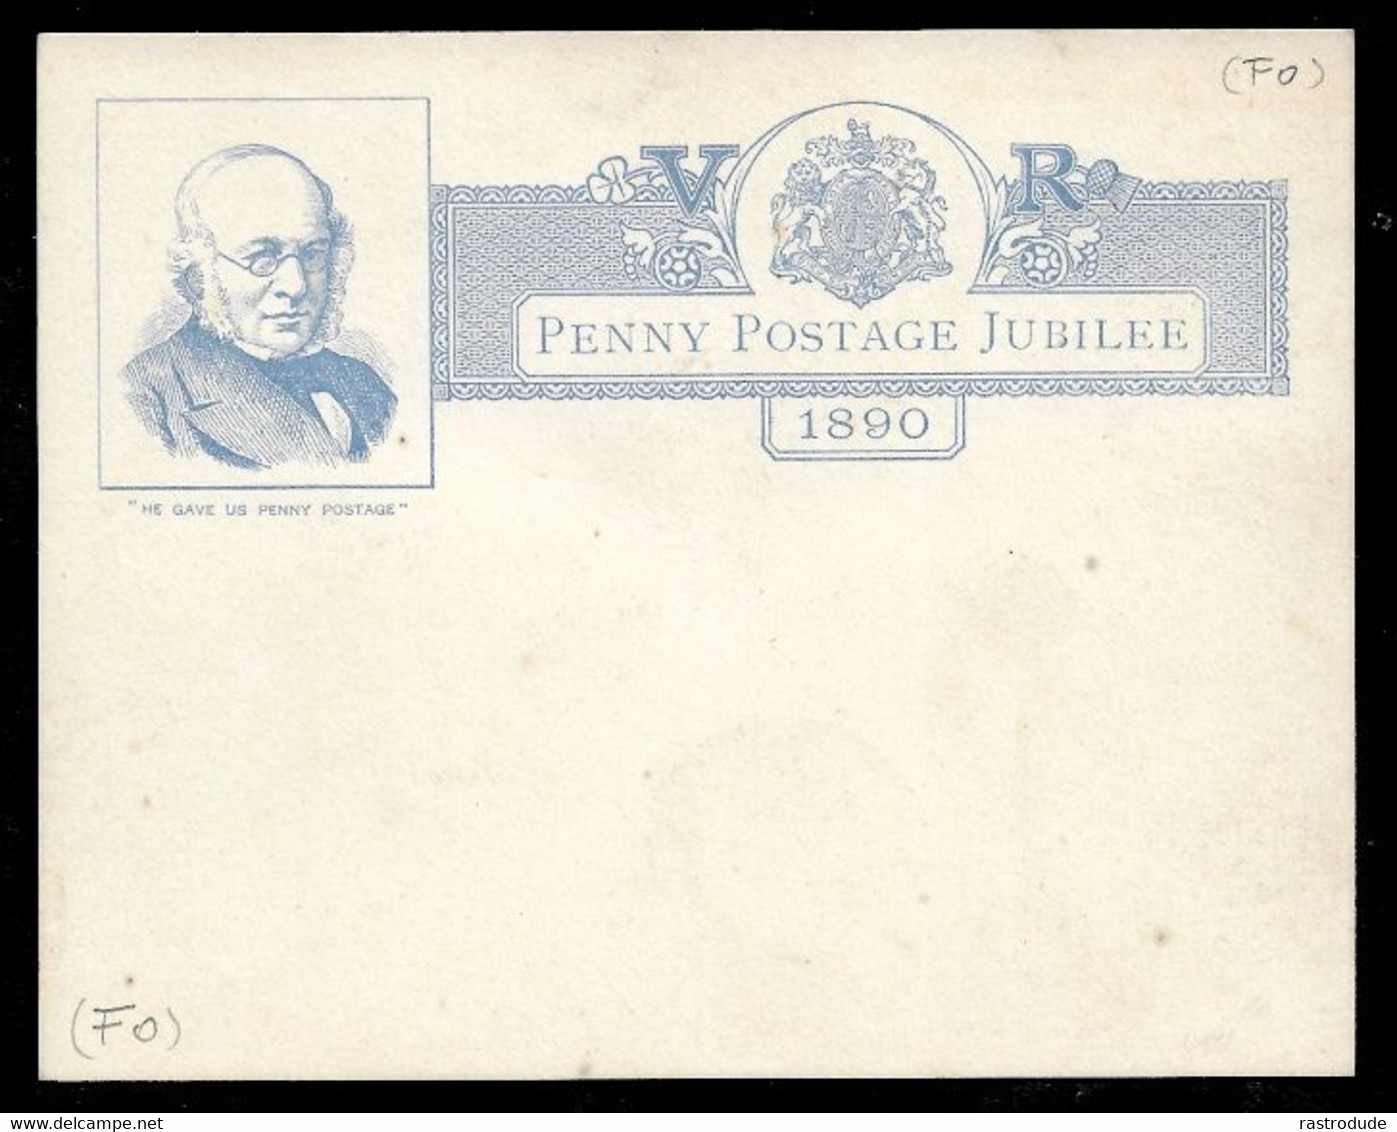 1890 VICTORIA - PENNY POSTAGE JUBILEE PC - SIR ROWLAND HILL  - UNUSED - Marcofilie